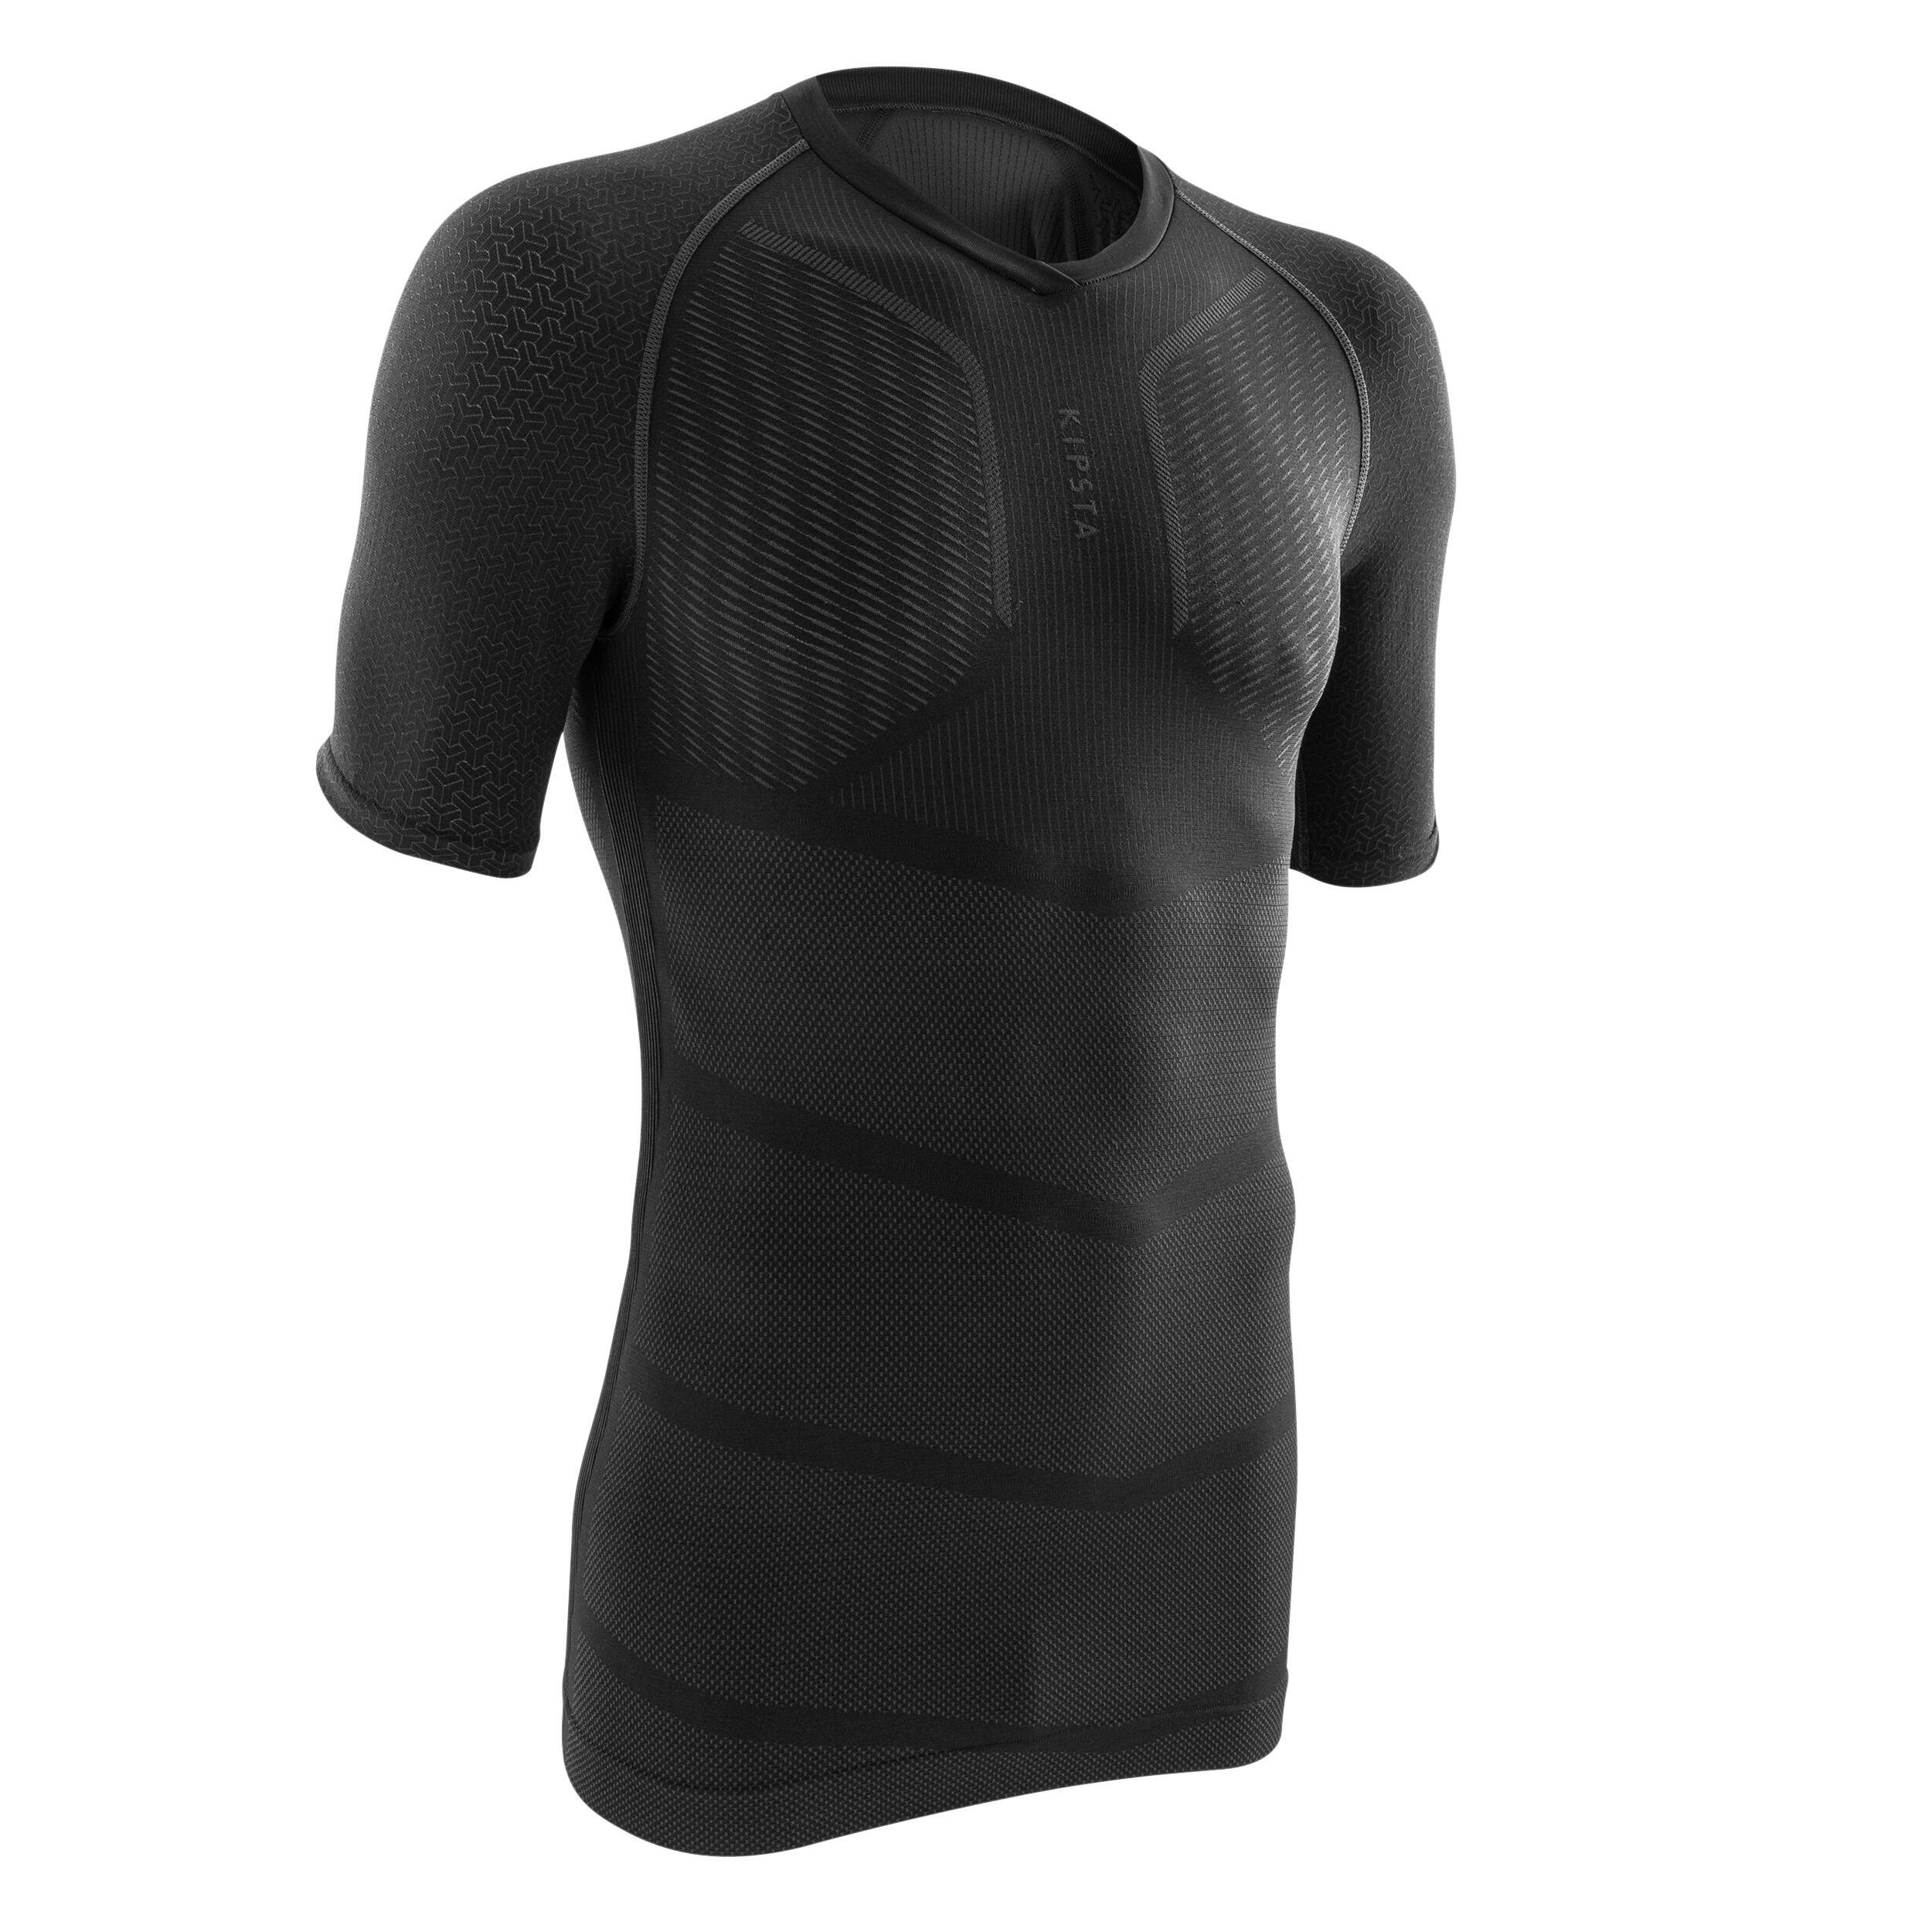 Adult Short-Sleeved Thermal Base Layer Top Keepdry 500 - Black 1/6